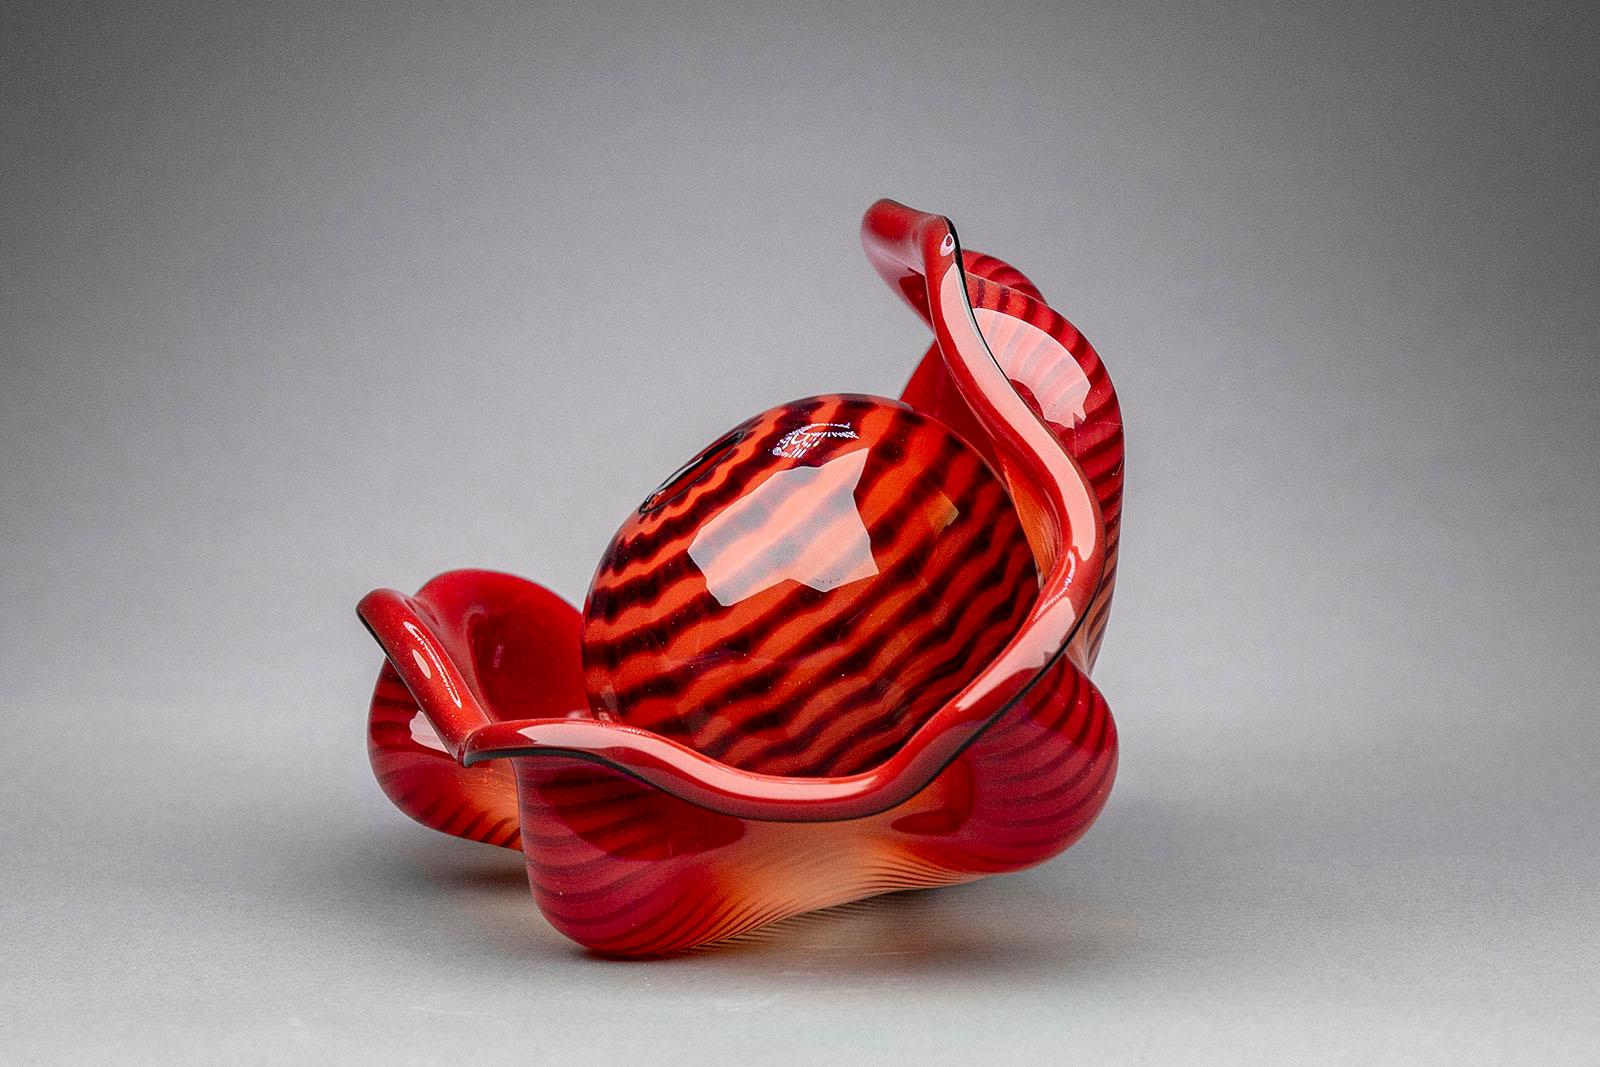 Dale Chihuly – Chinese Red Seaform Pair, 1995
Hand Blown Glass
Size: 3 ¼ x 3 ¾ and 6 x 11 x 7 inches
Signed and dated by the artist
Certificate of Authenticity included

Throughout his rich and prolific career, Dale Chihuly has been searching for